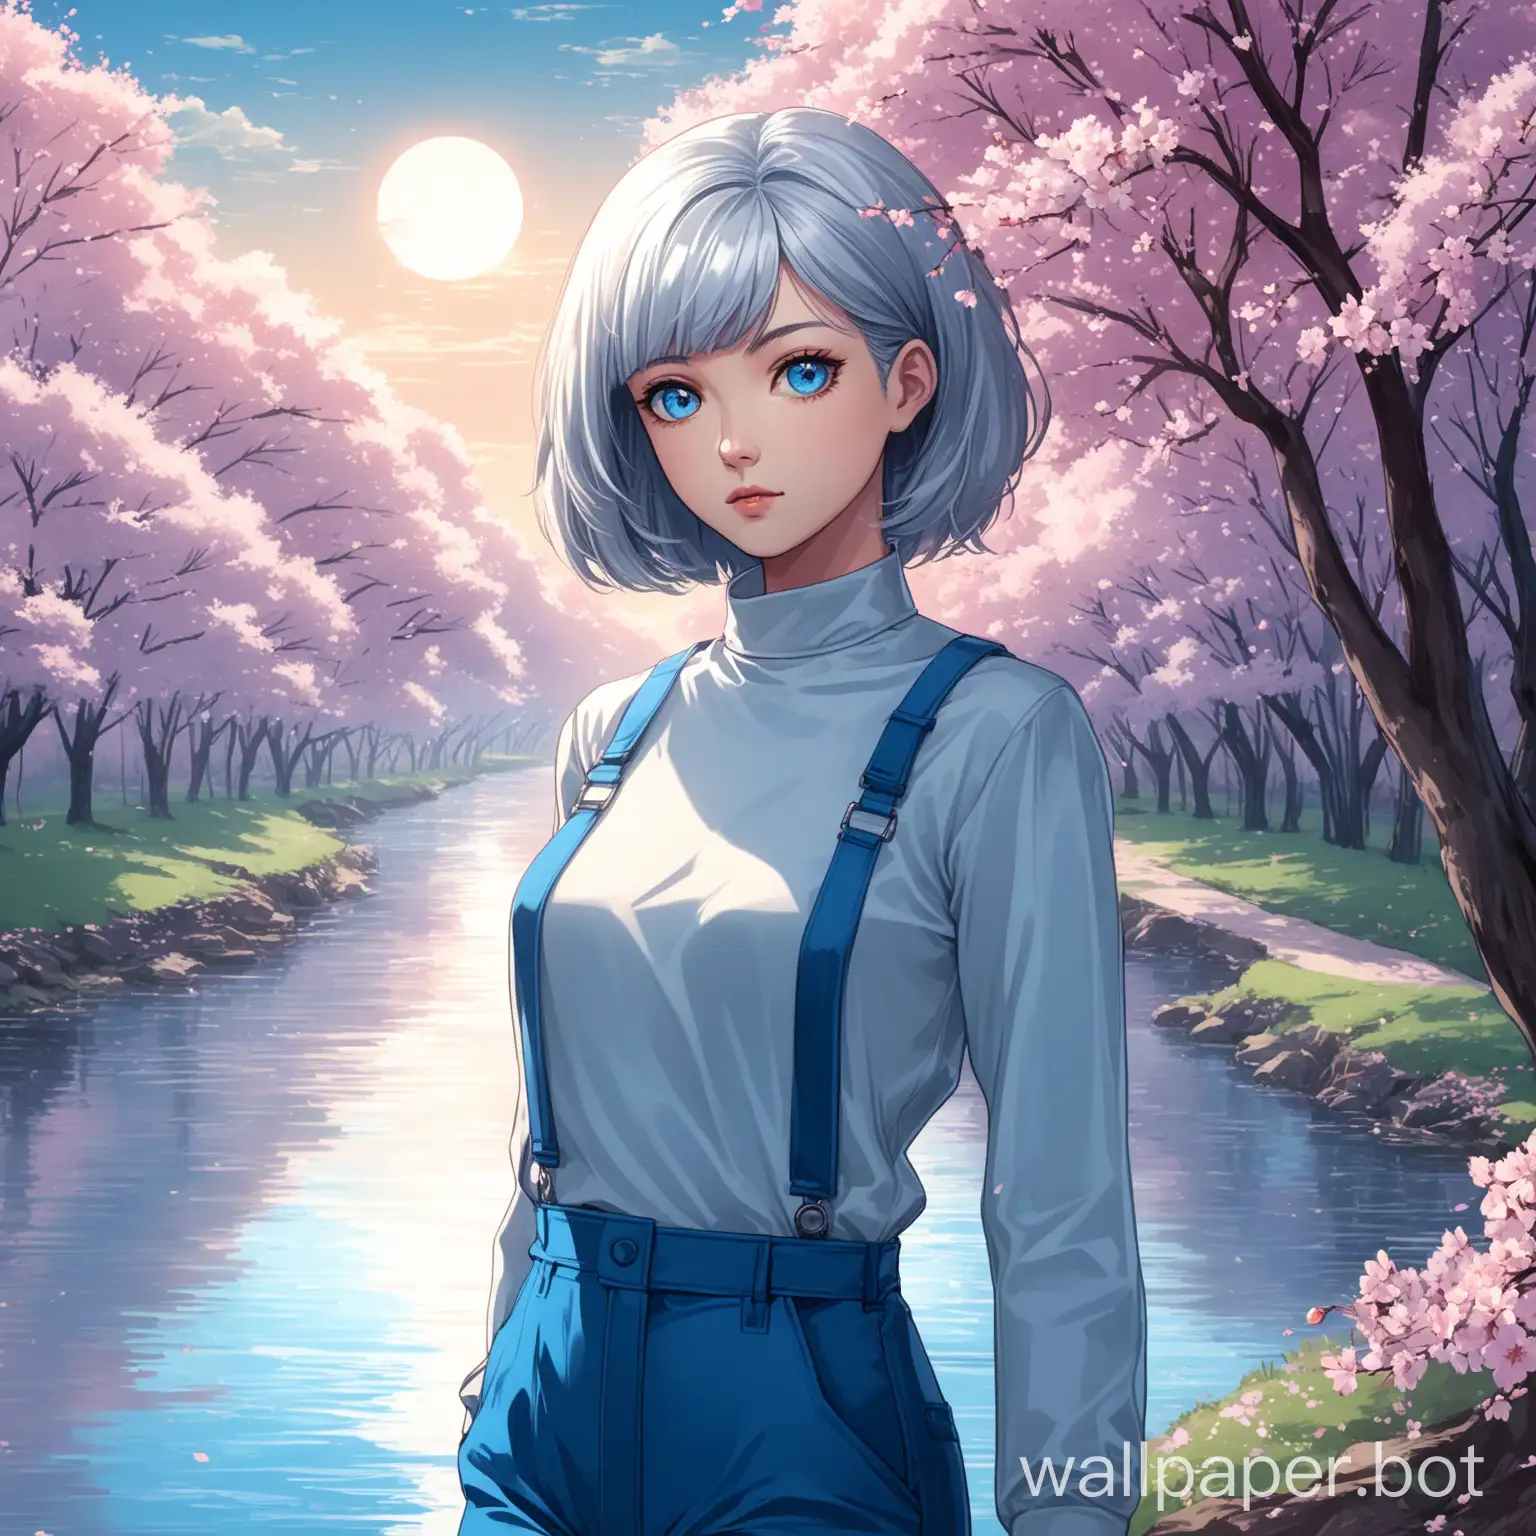 The wallpaper features a serene landscape scene with a modern twist. In the background, there's a tranquil river flowing gently, lined with cherry blossom trees in full bloom. The sky is painted in soft shades of blue and pink, creating a calming atmosphere.In the foreground, a confident and daring-looking girl stands by the riverbank. She has short, sleek silver hair that catches the light, adding to her bold and stylish appearance. She wears a chic and modern outfit, perhaps a form-fitting top paired with fashionable pants or a skirt, all in shades of blue or pink to match the monochromatic theme of the wallpaper.The girl's expression is determined and captivating, with a hint of mystery in her eyes. She exudes confidence and charisma, drawing the viewer's attention with her presence. The overall aesthetic is anime-inspired, with vibrant colors and expressive features, creating a visually stunning wallpaper that's both elegant and captivating.